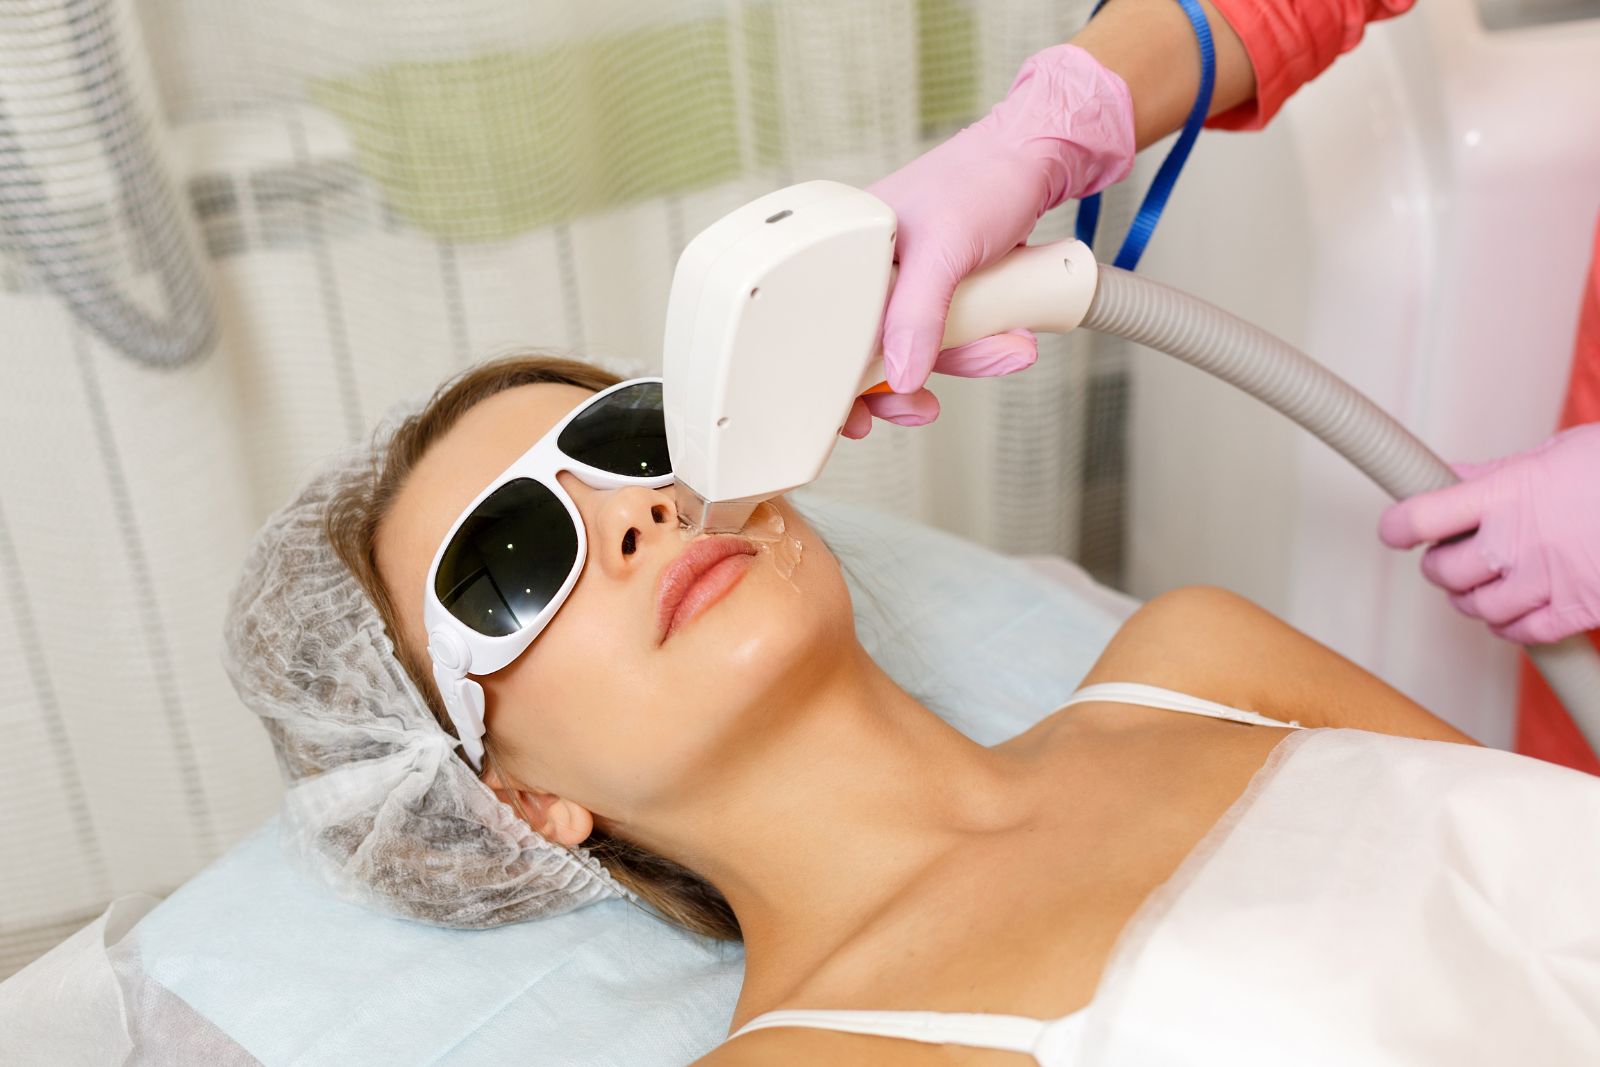 A woman is getting a laser treatment at a beauty salon.